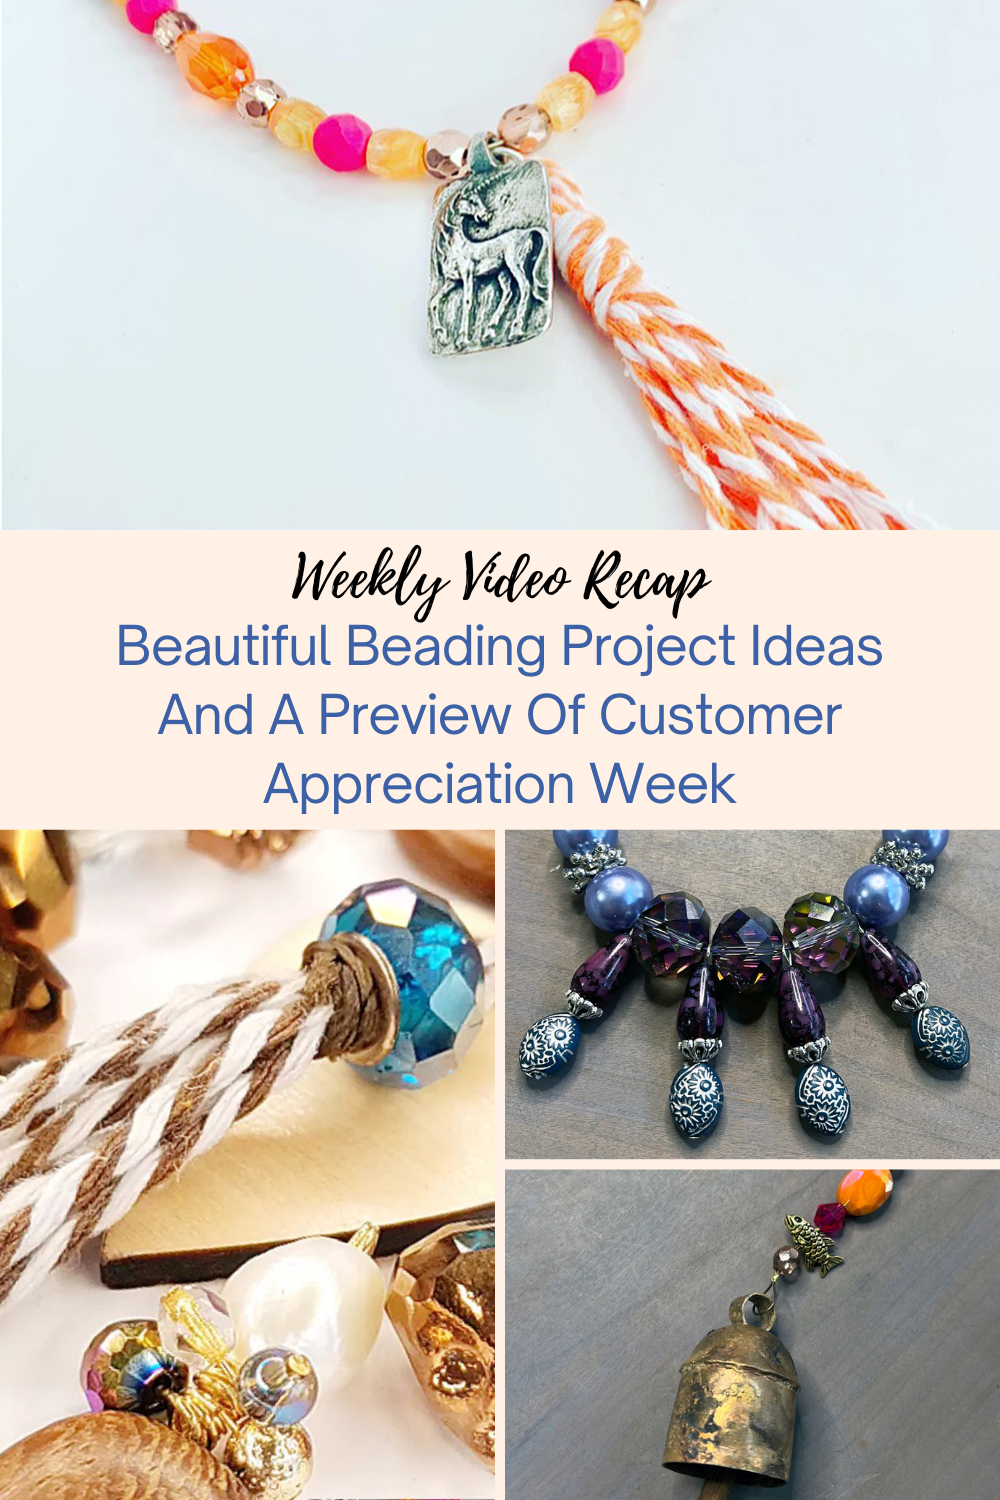 Beautiful Beading Project Ideas And A Preview Of Customer Appreciation Week Collage